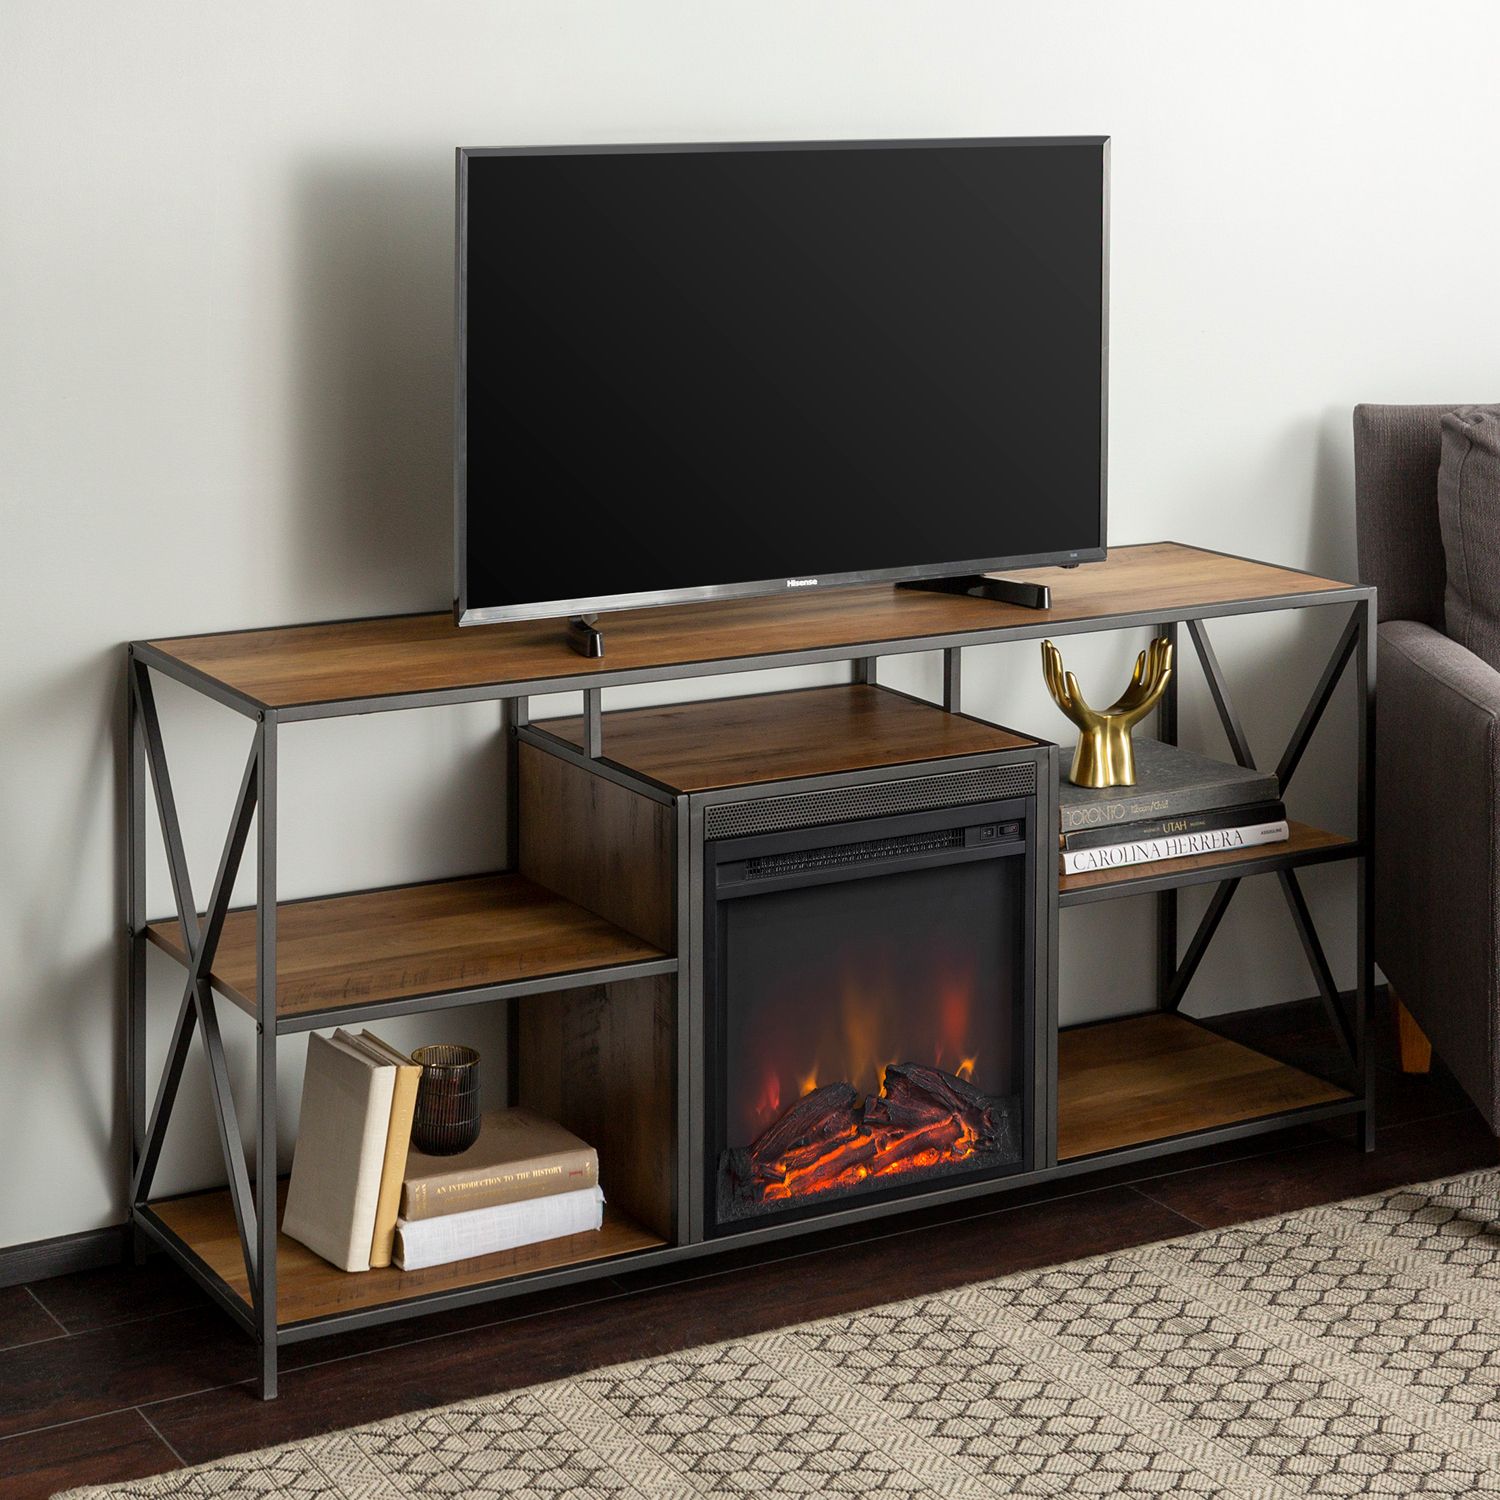 Rustic Oak Tv Stand With Fireplace – Pier1 Inside Urban Rustic Tv Stands (View 6 of 15)